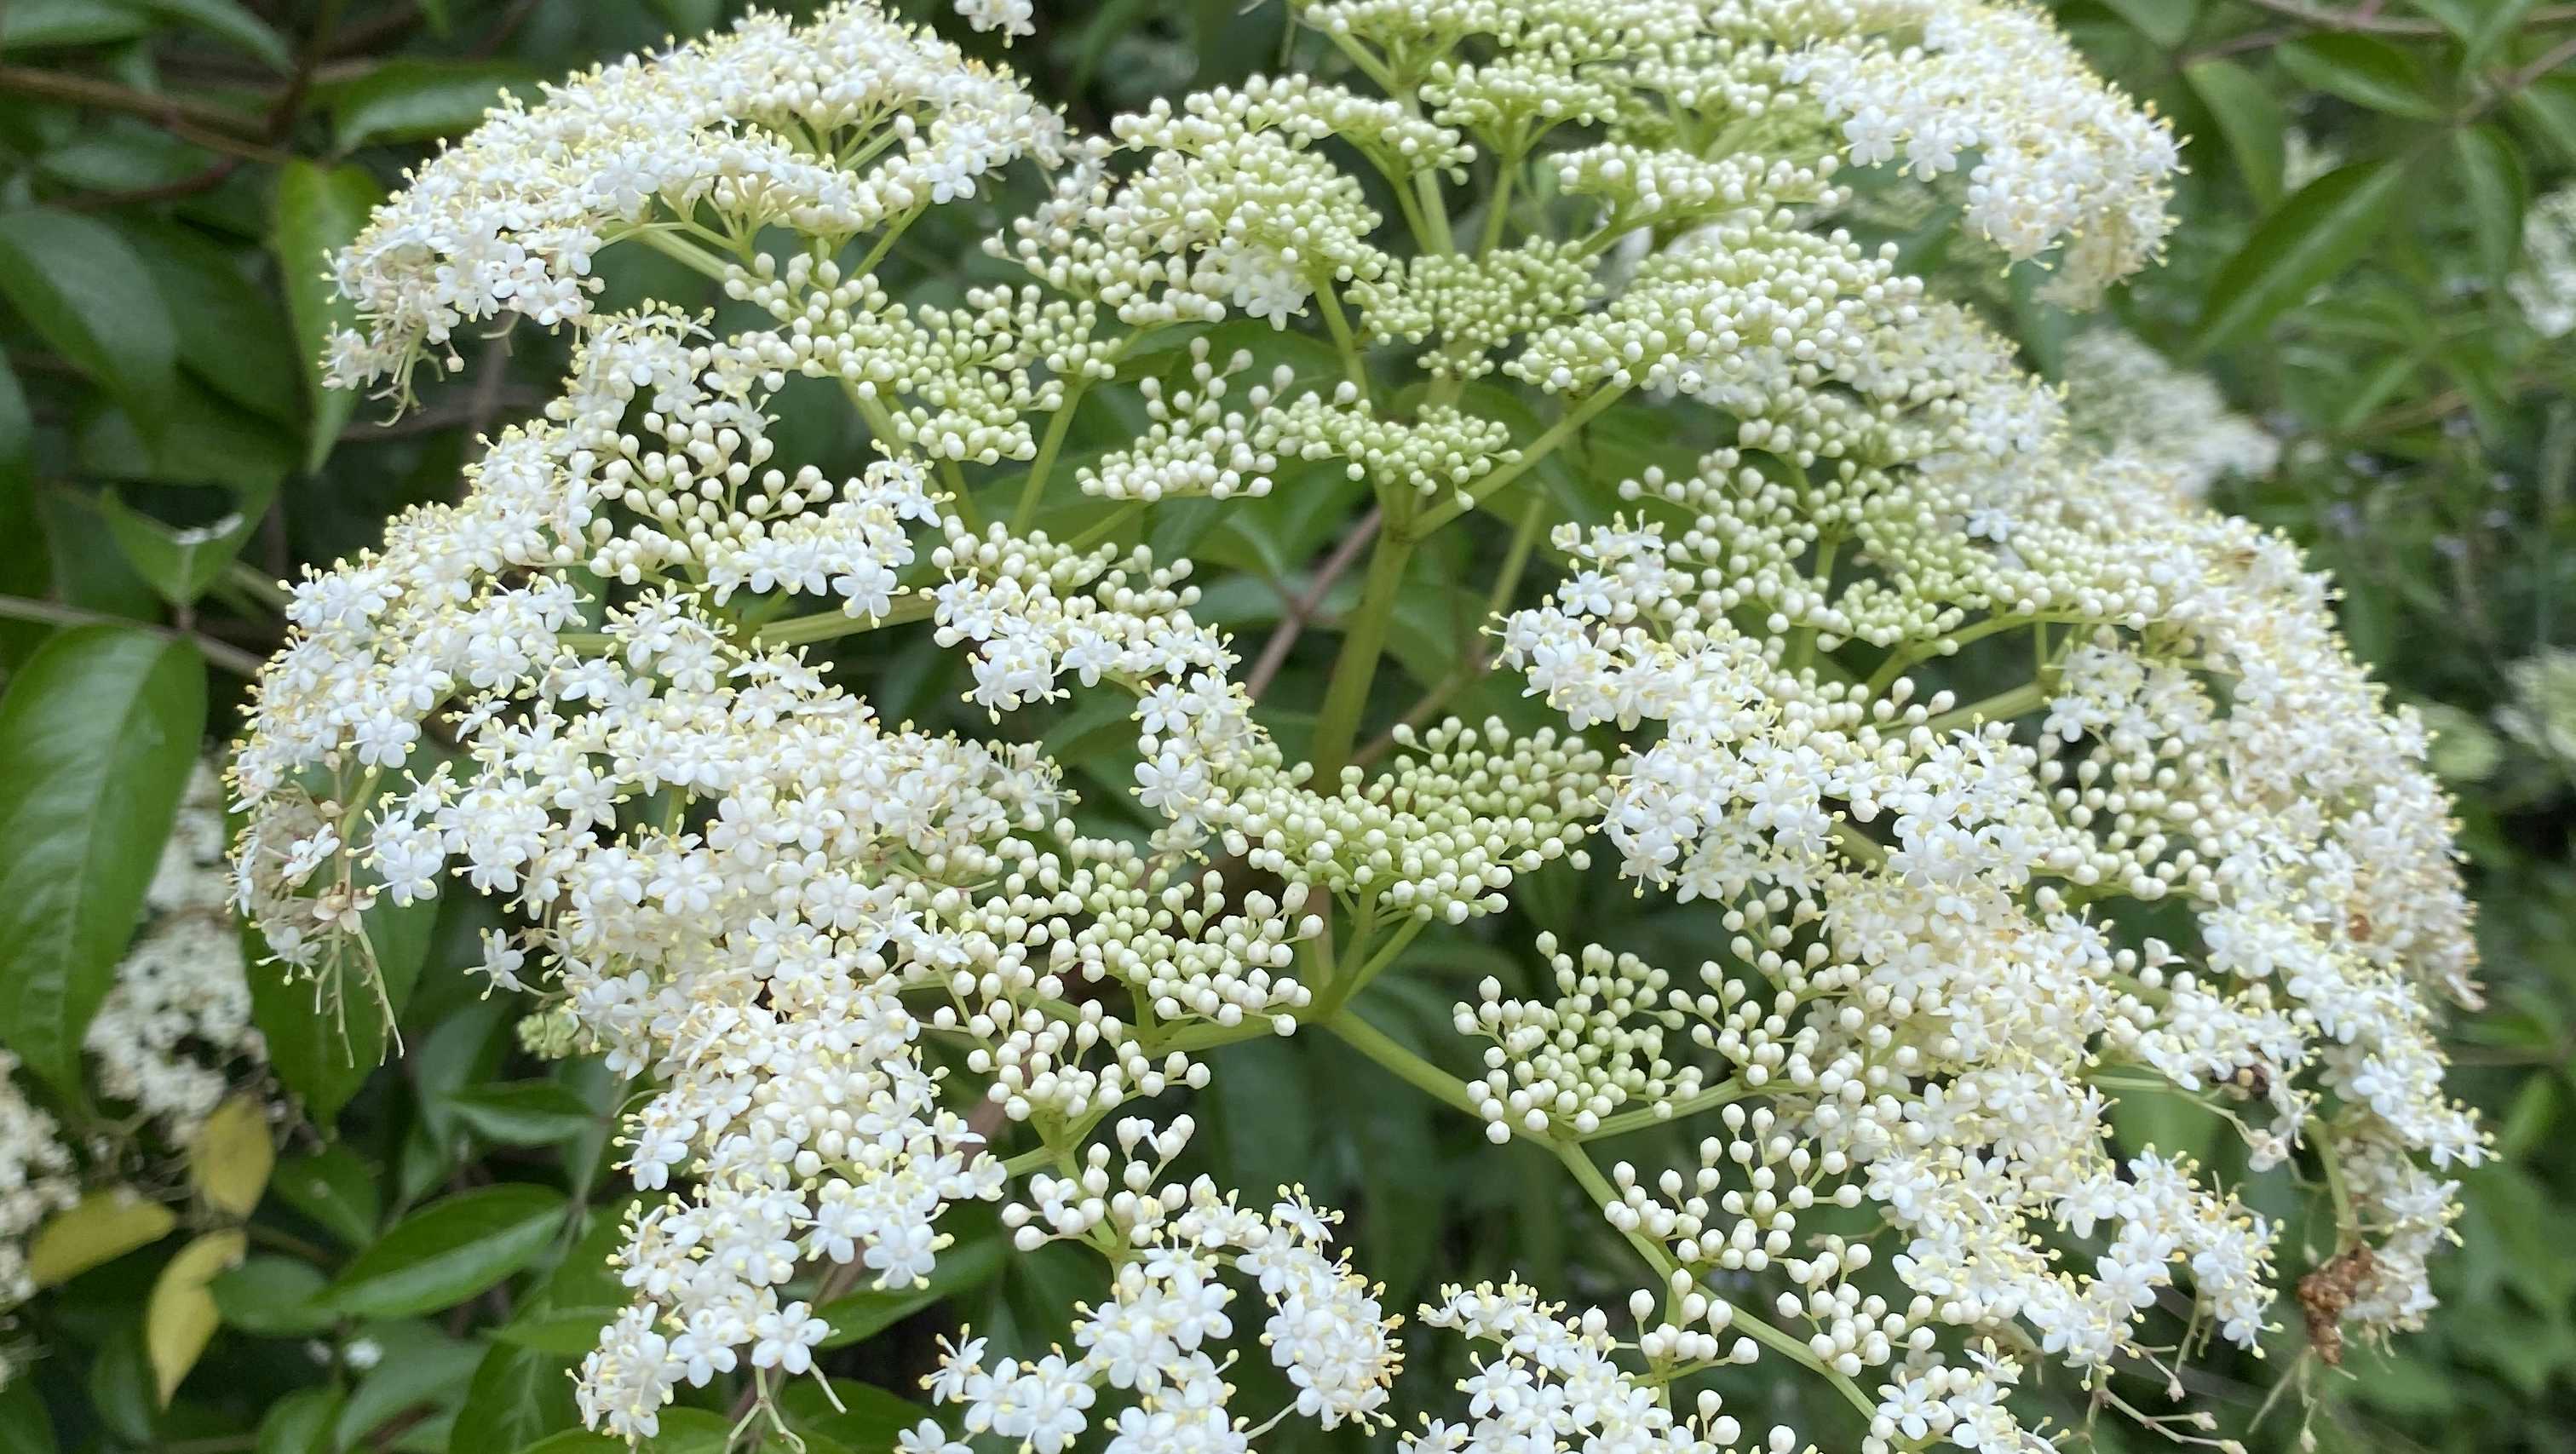 A large cluster of off-white blossoms from a Black Elderberry plant